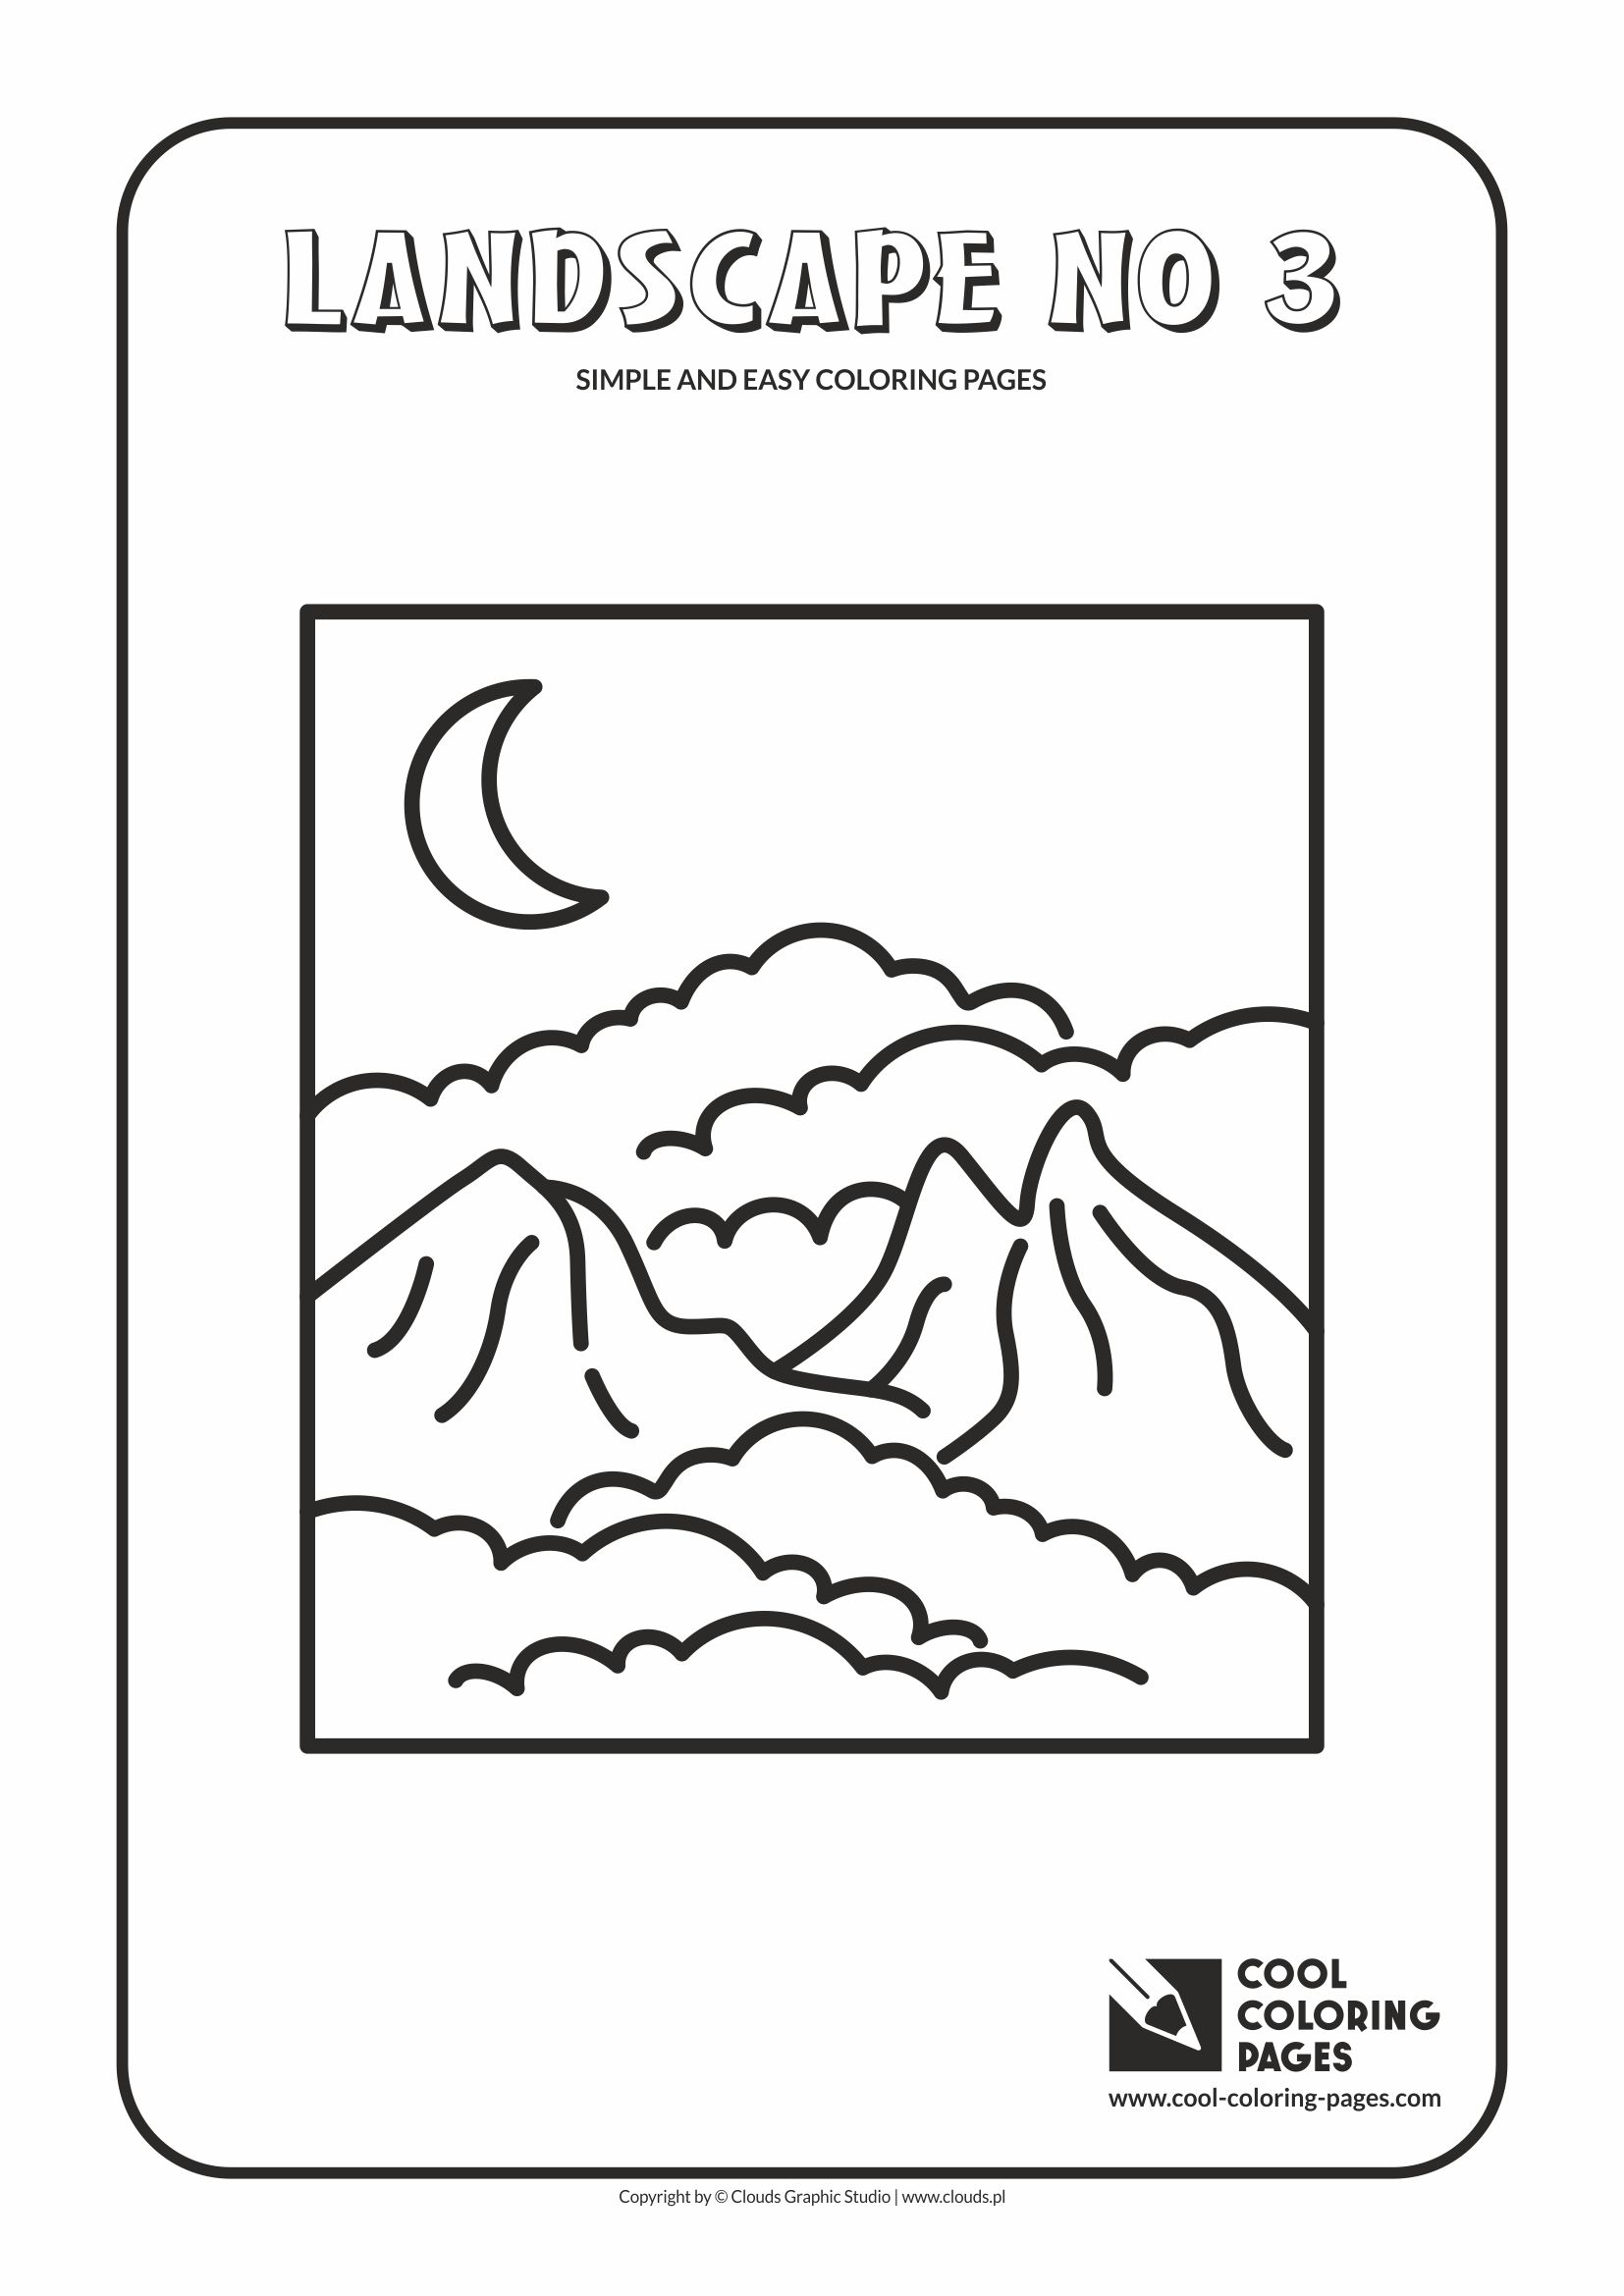 Simple and easy coloring pages for toddlers - Landscape no 3